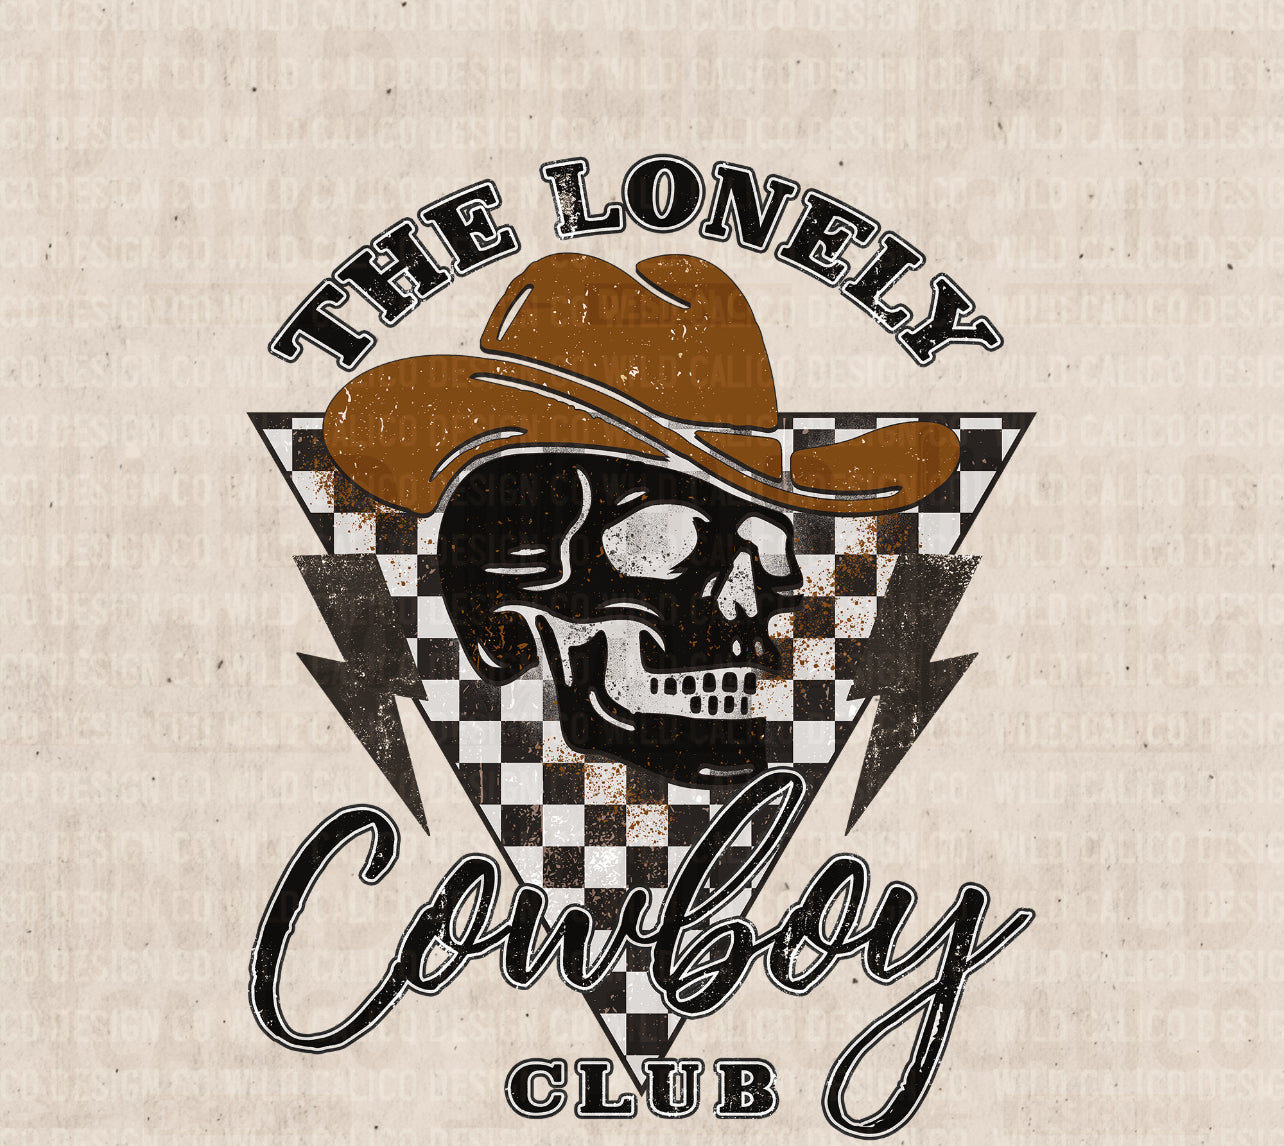 The lonely cowboy club (kids)